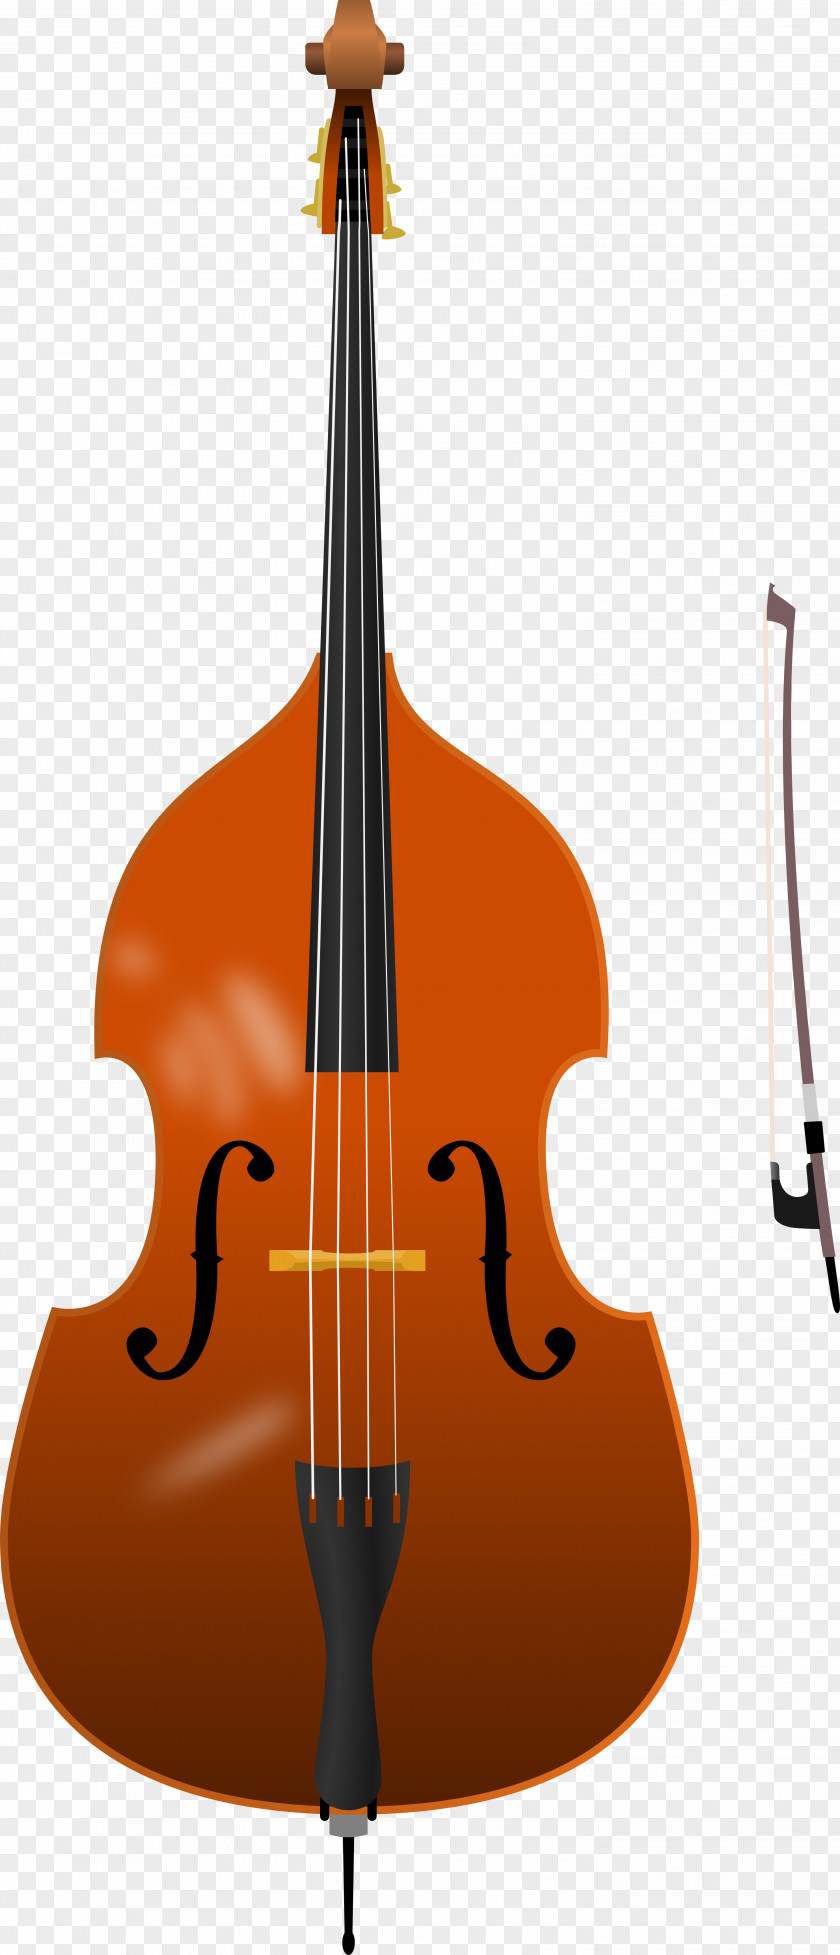 String Bass Cliparts Double Cello Guitar Instruments Clip Art PNG